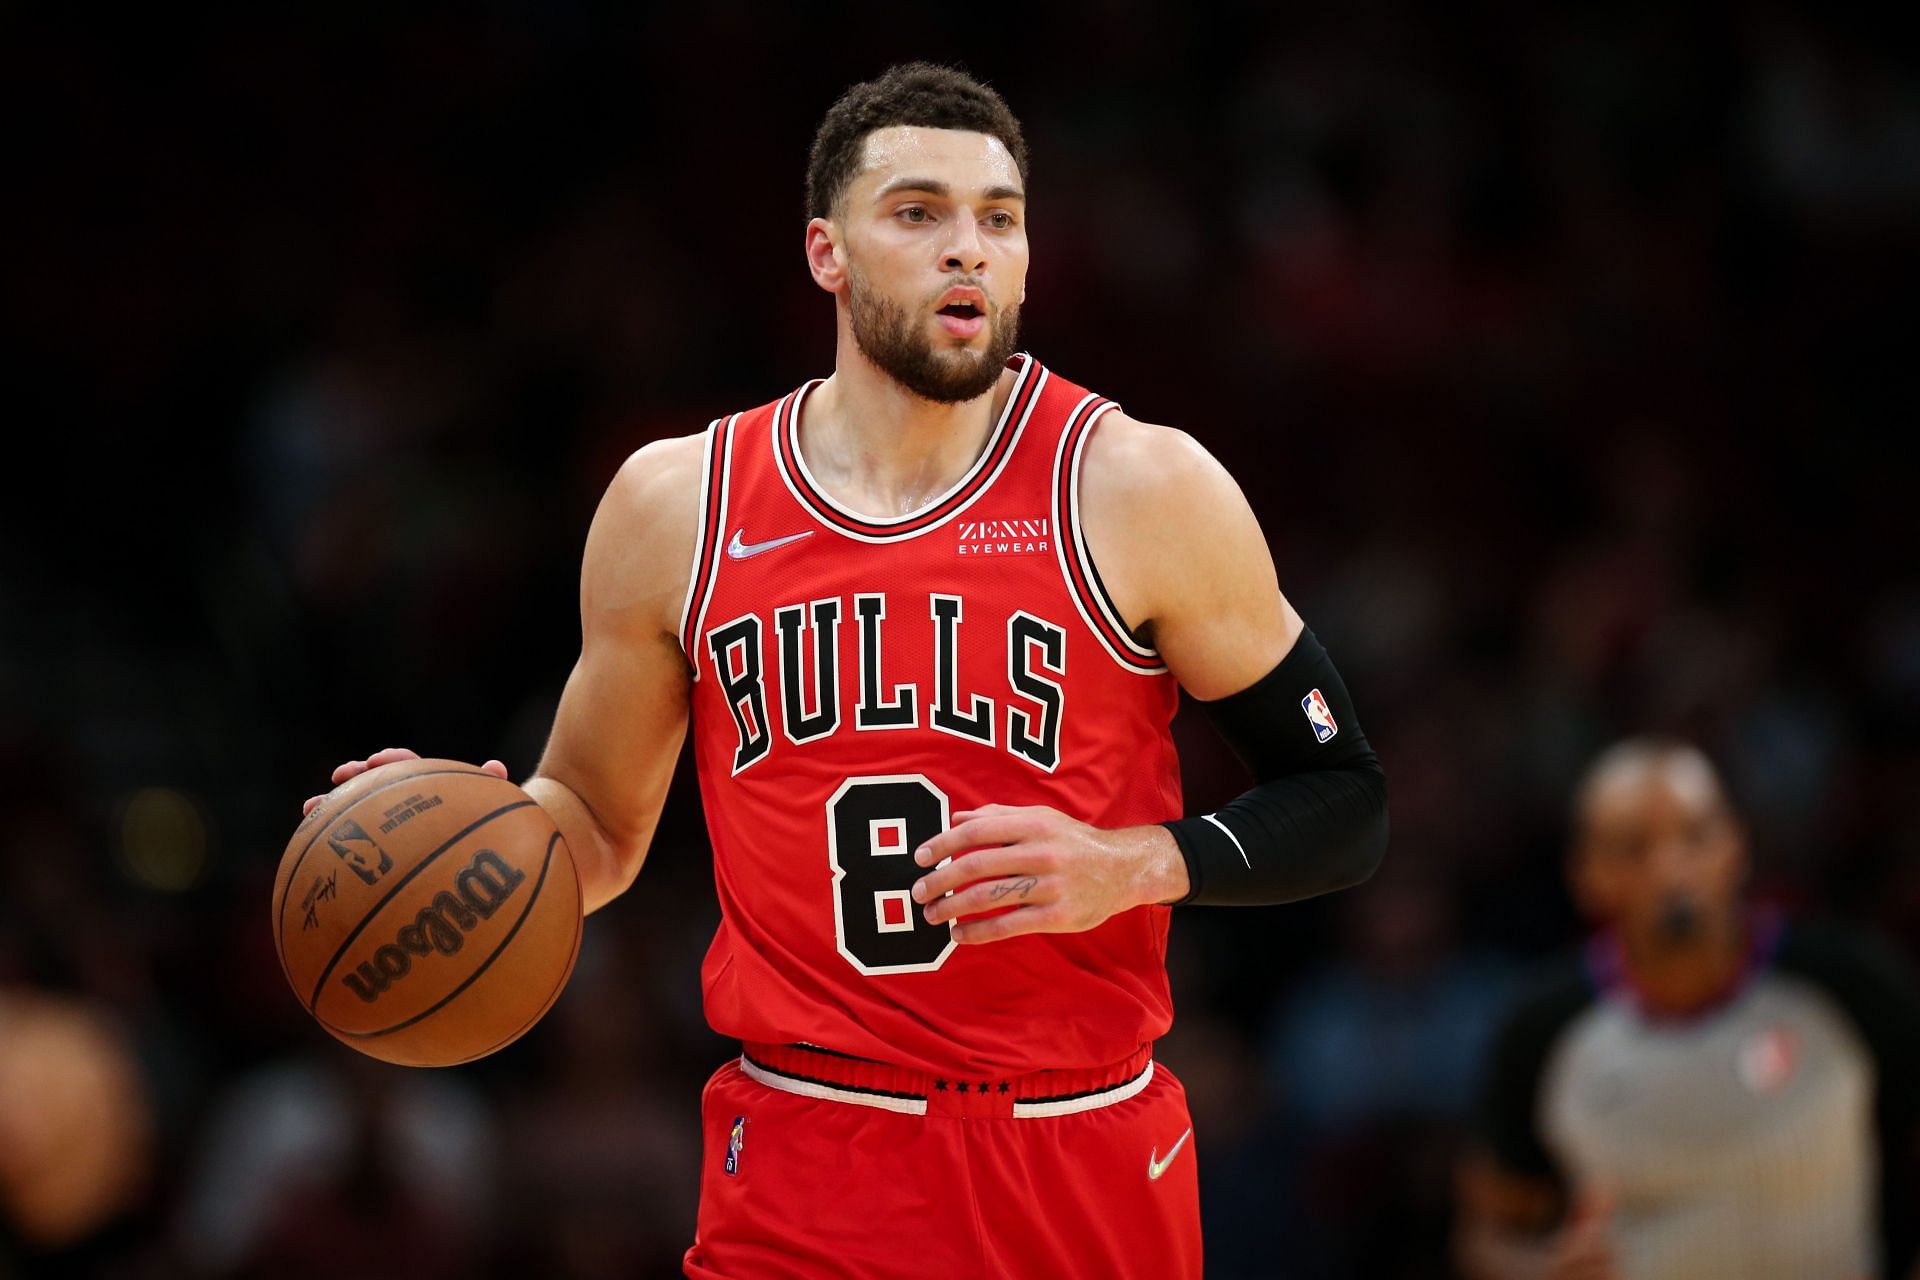 Chicago Bulls superstar Zach LaVine is unavailable for this game against the Grizzlies